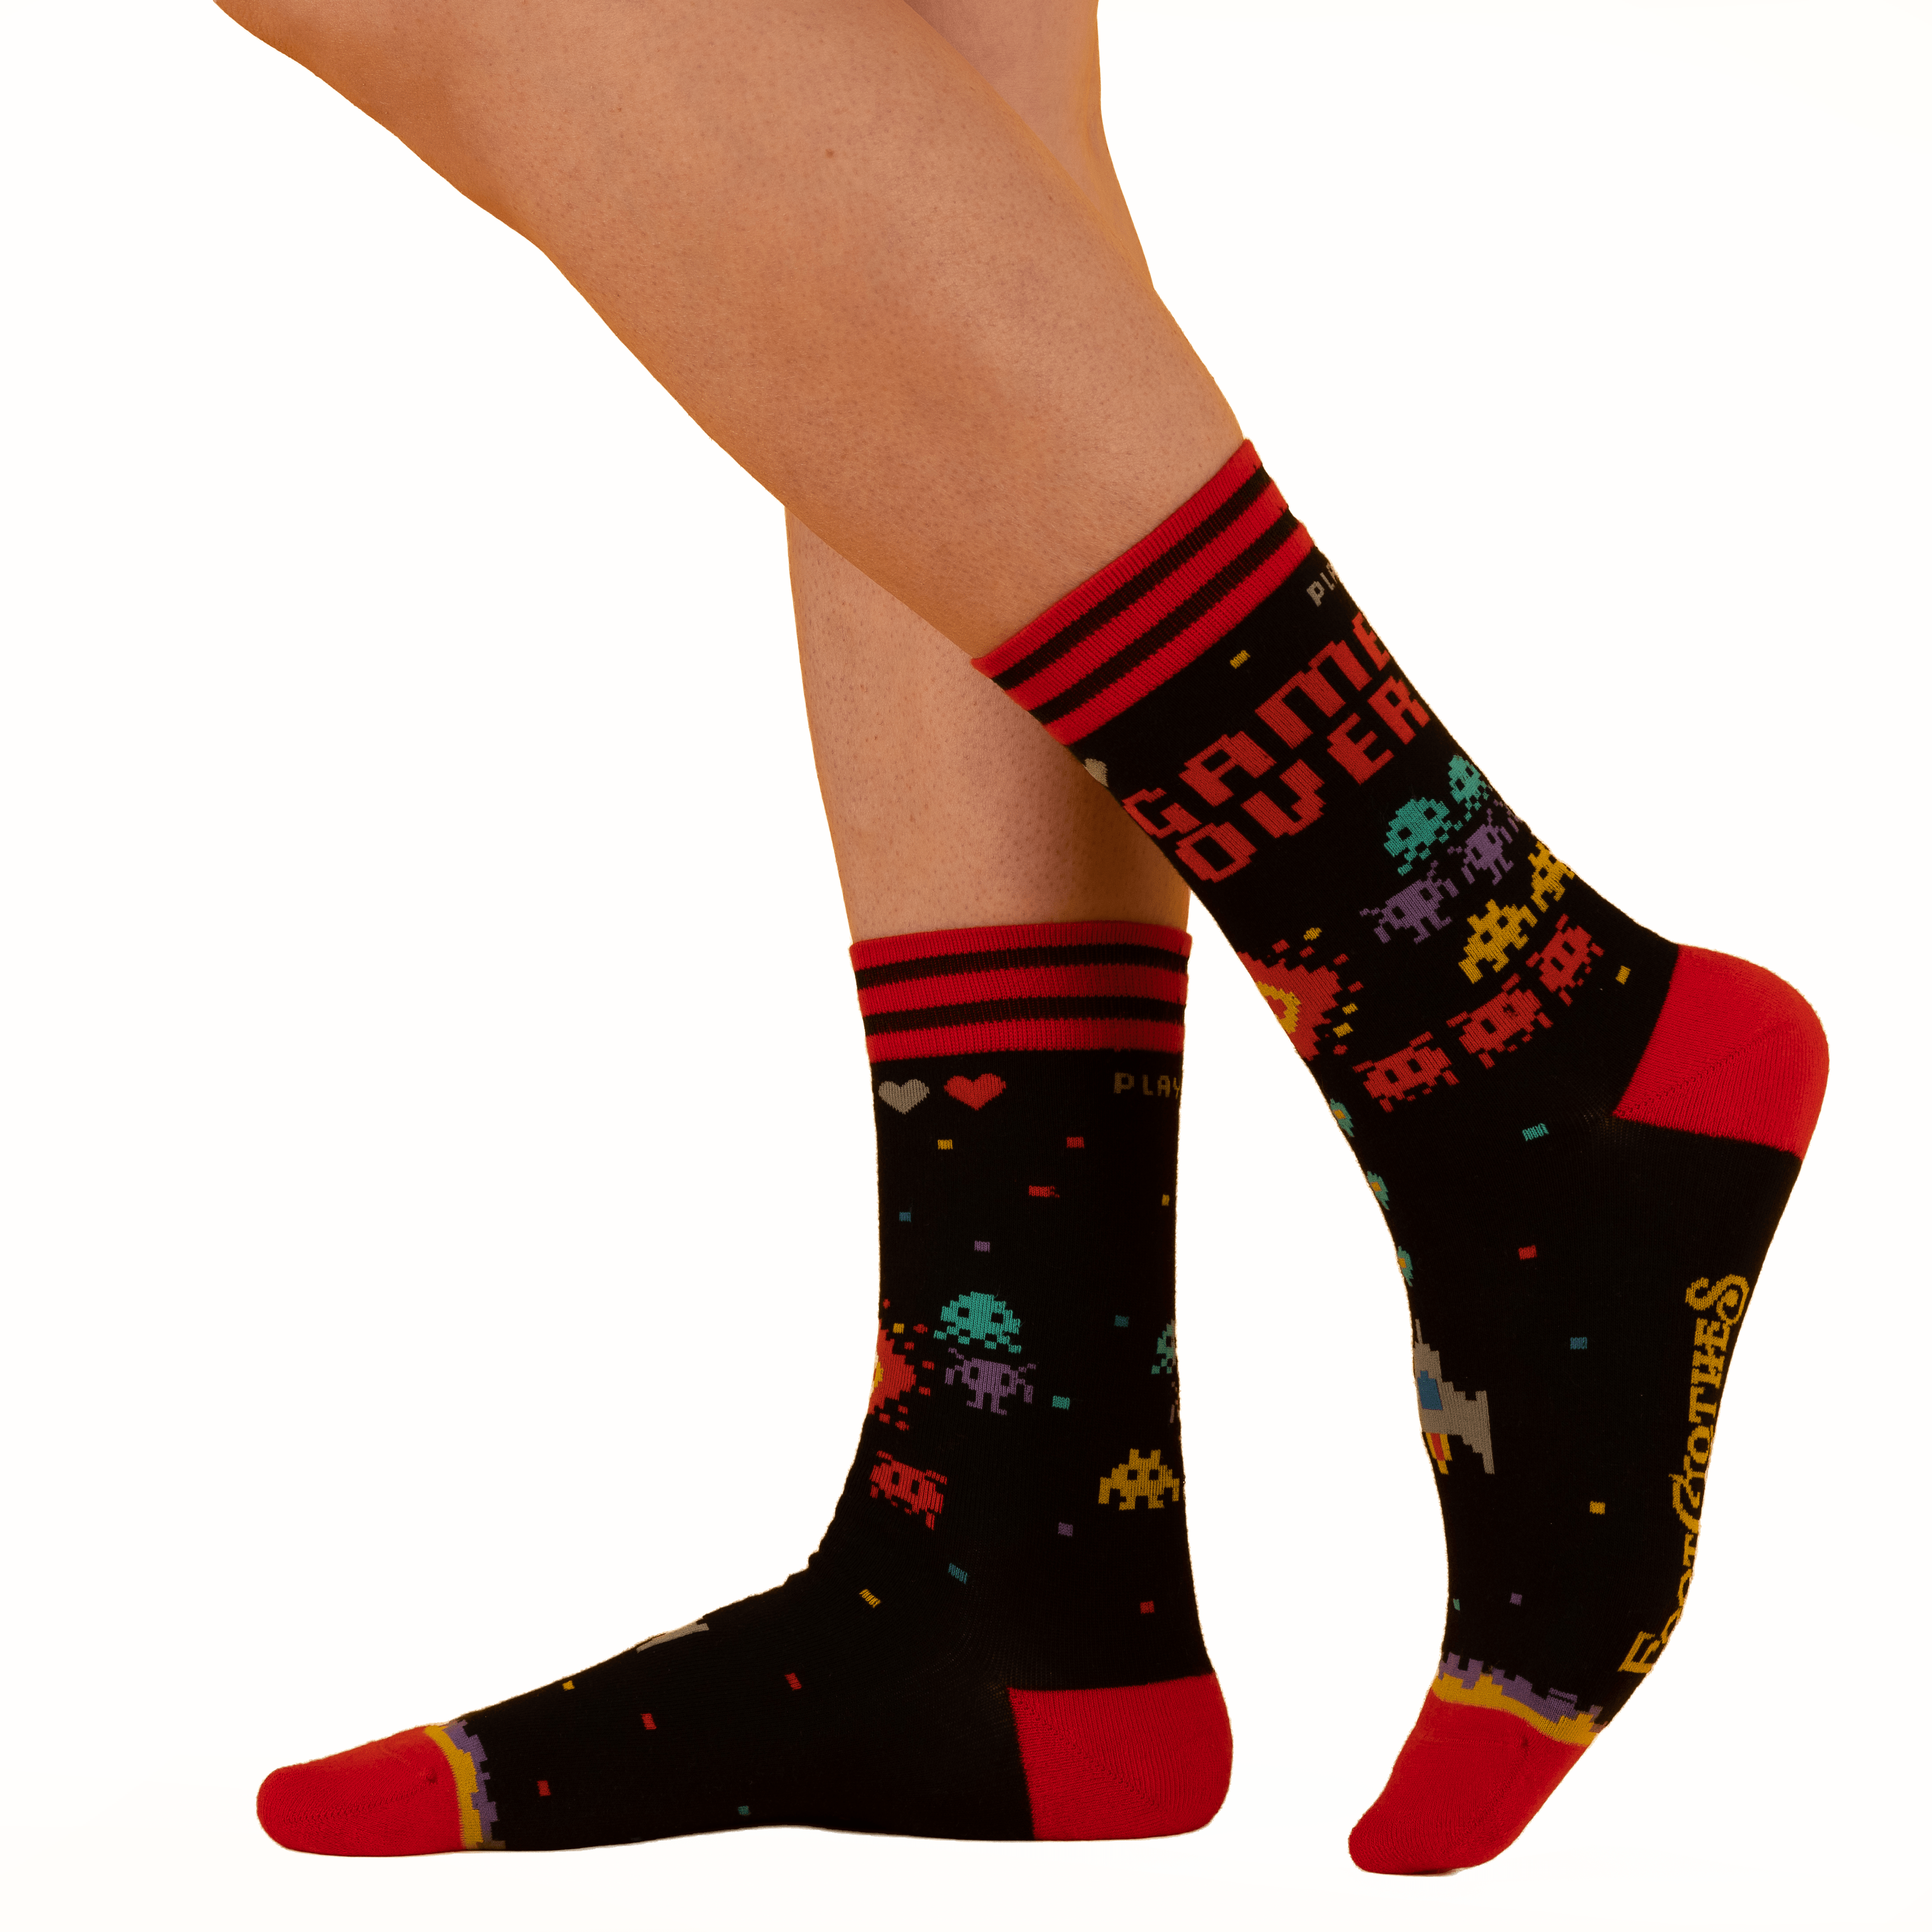 Game Over 80s Video Game Crew Socks - FootClothes